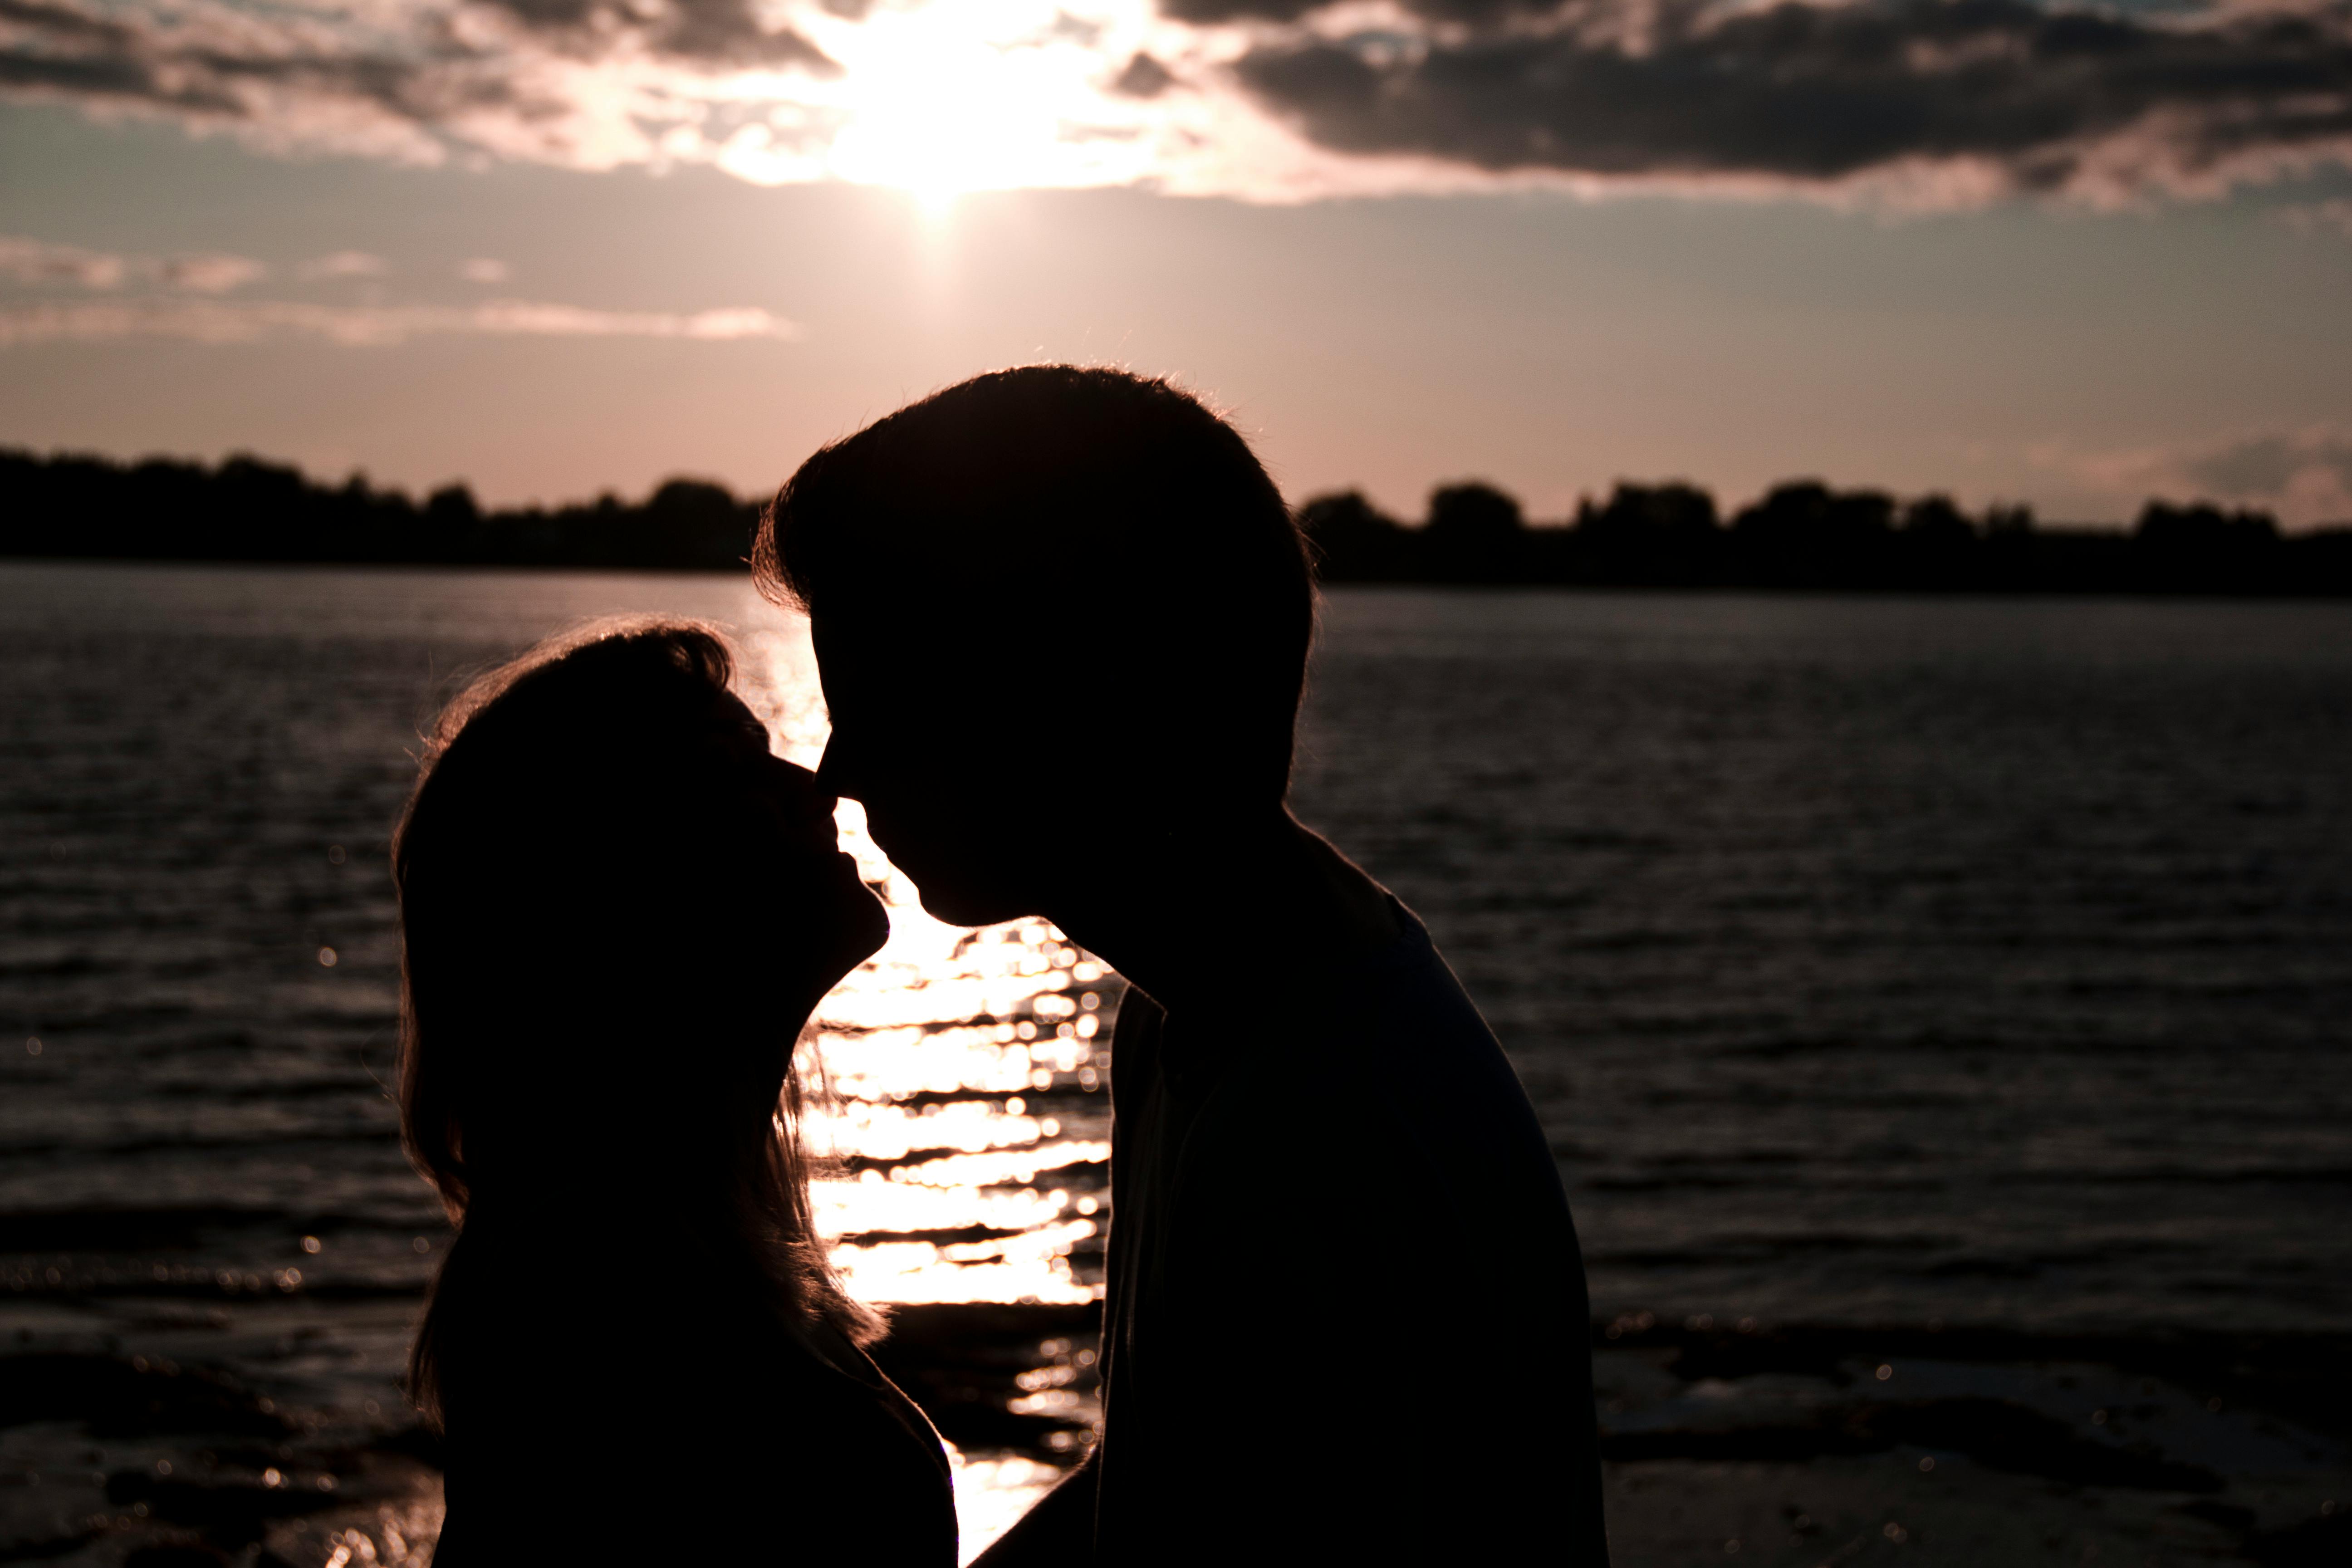 A silhouette photo of a man and a woman kissing | Source: Pexels